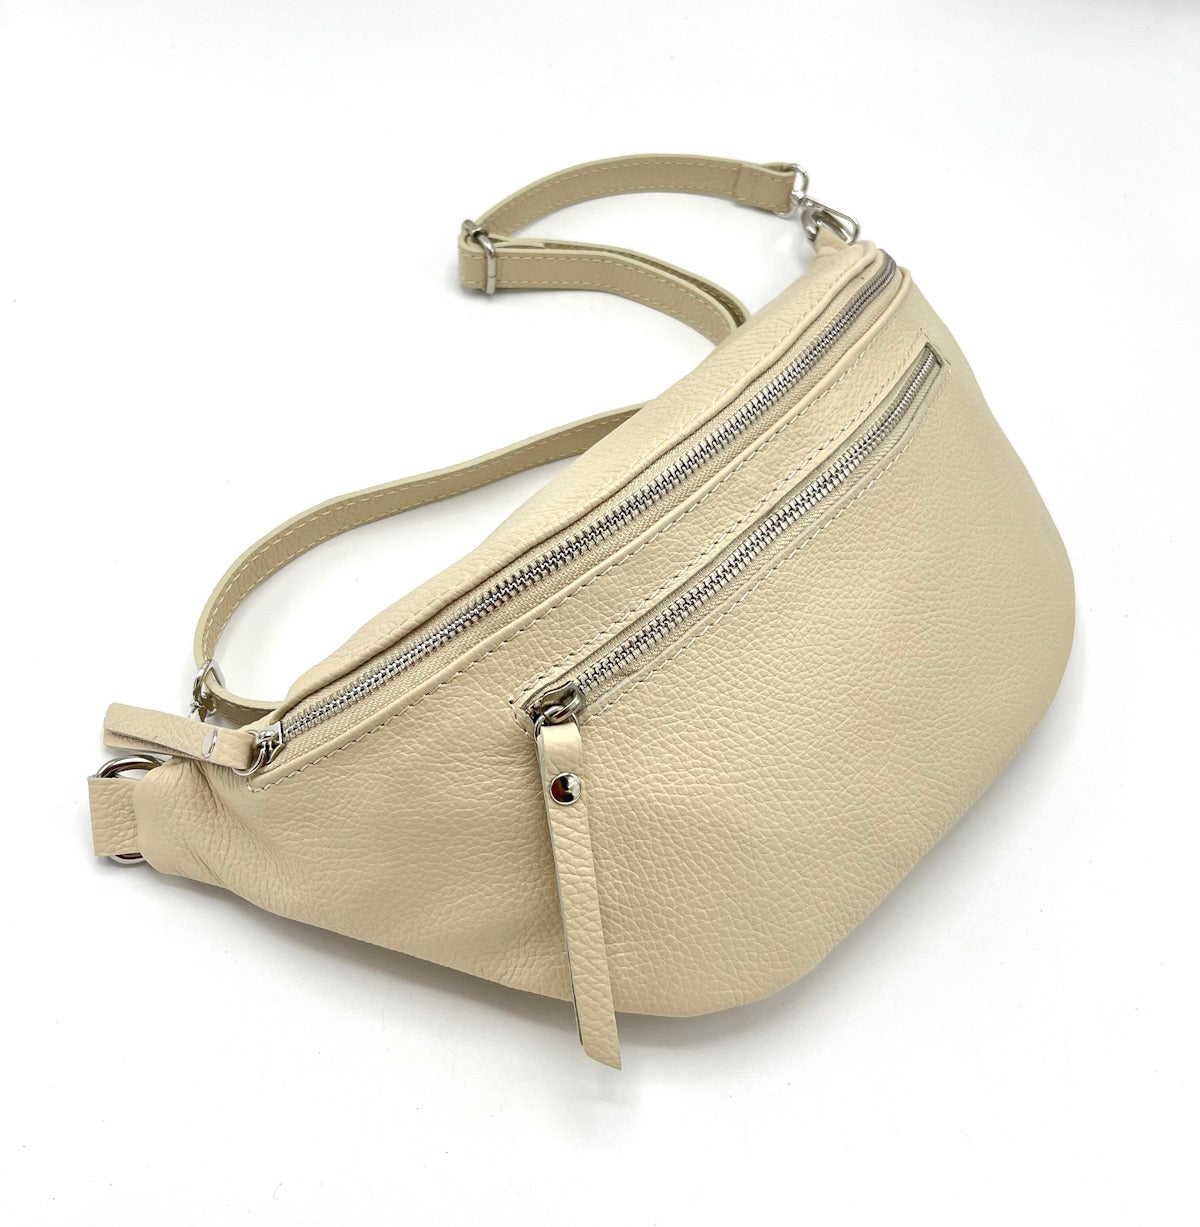 Genuine leather crossbody bag, Made in Italy, art. 112458